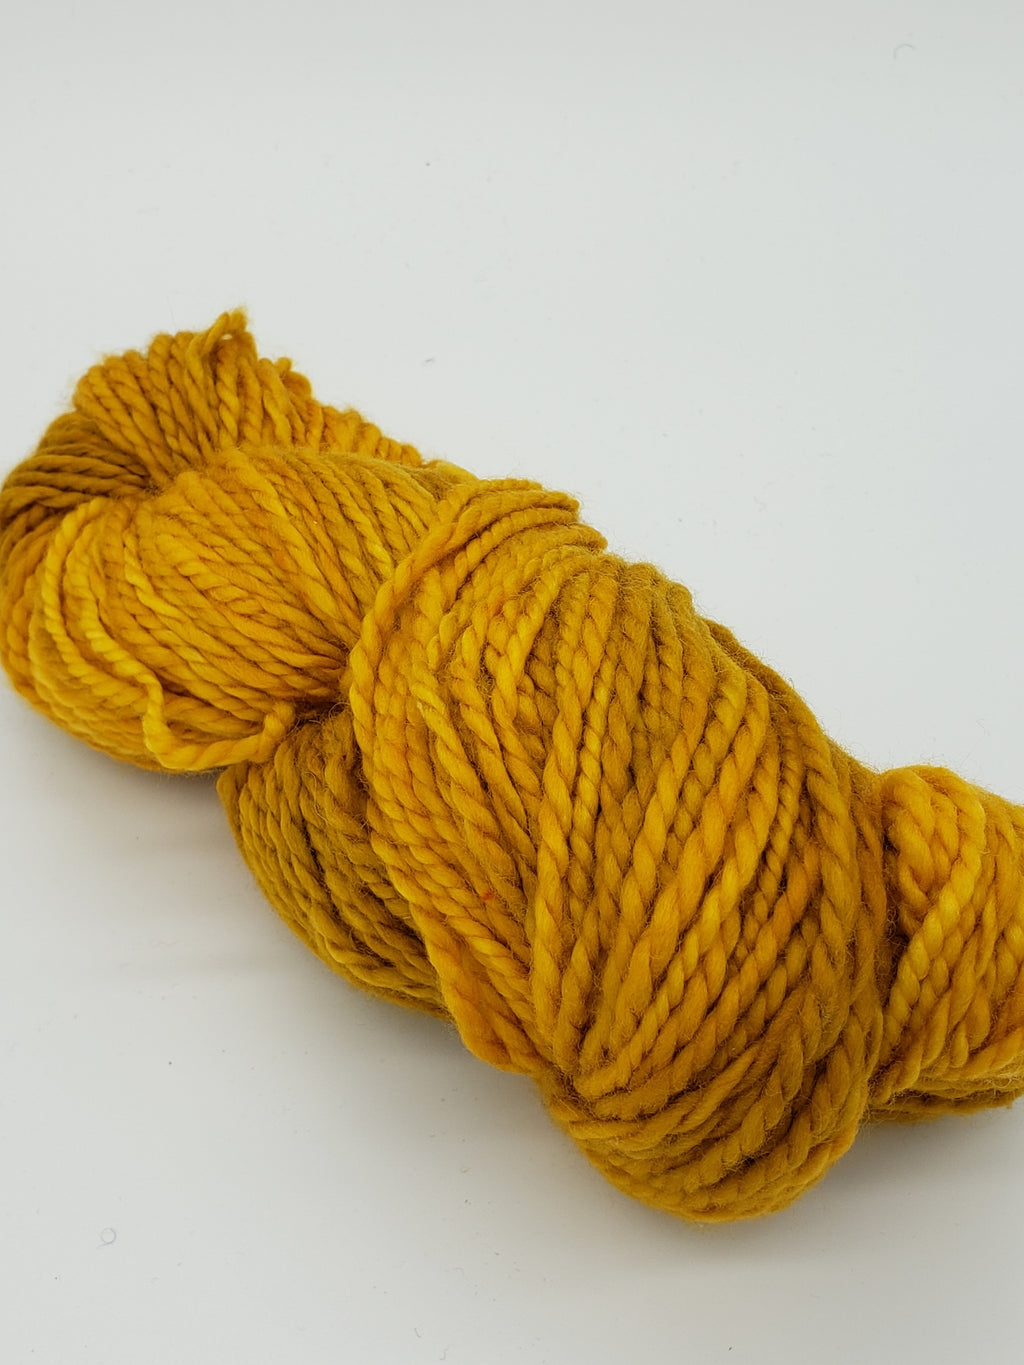 GOLDEN OAK - LIL TWISTY 2 PLY -  Hand Dyed Shades of Gold, Yellow, Toffee Worsted Yarn for Rug Hooking - RSS218